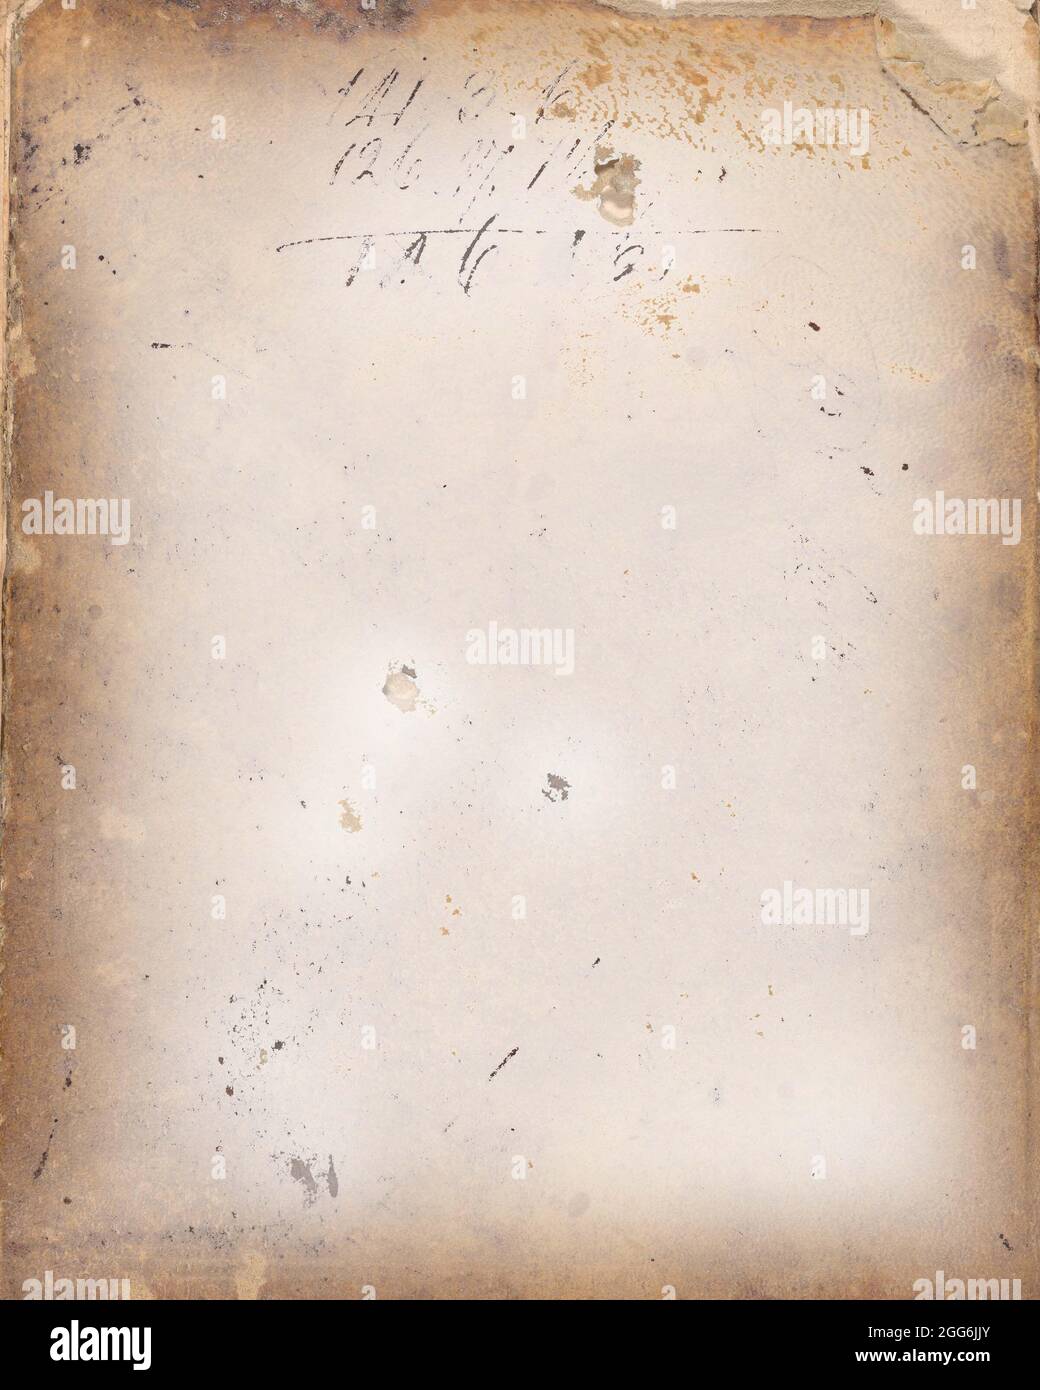 This is an antique or vintage style photo overlay or background to use in graphic design or photography projects Stock Photo